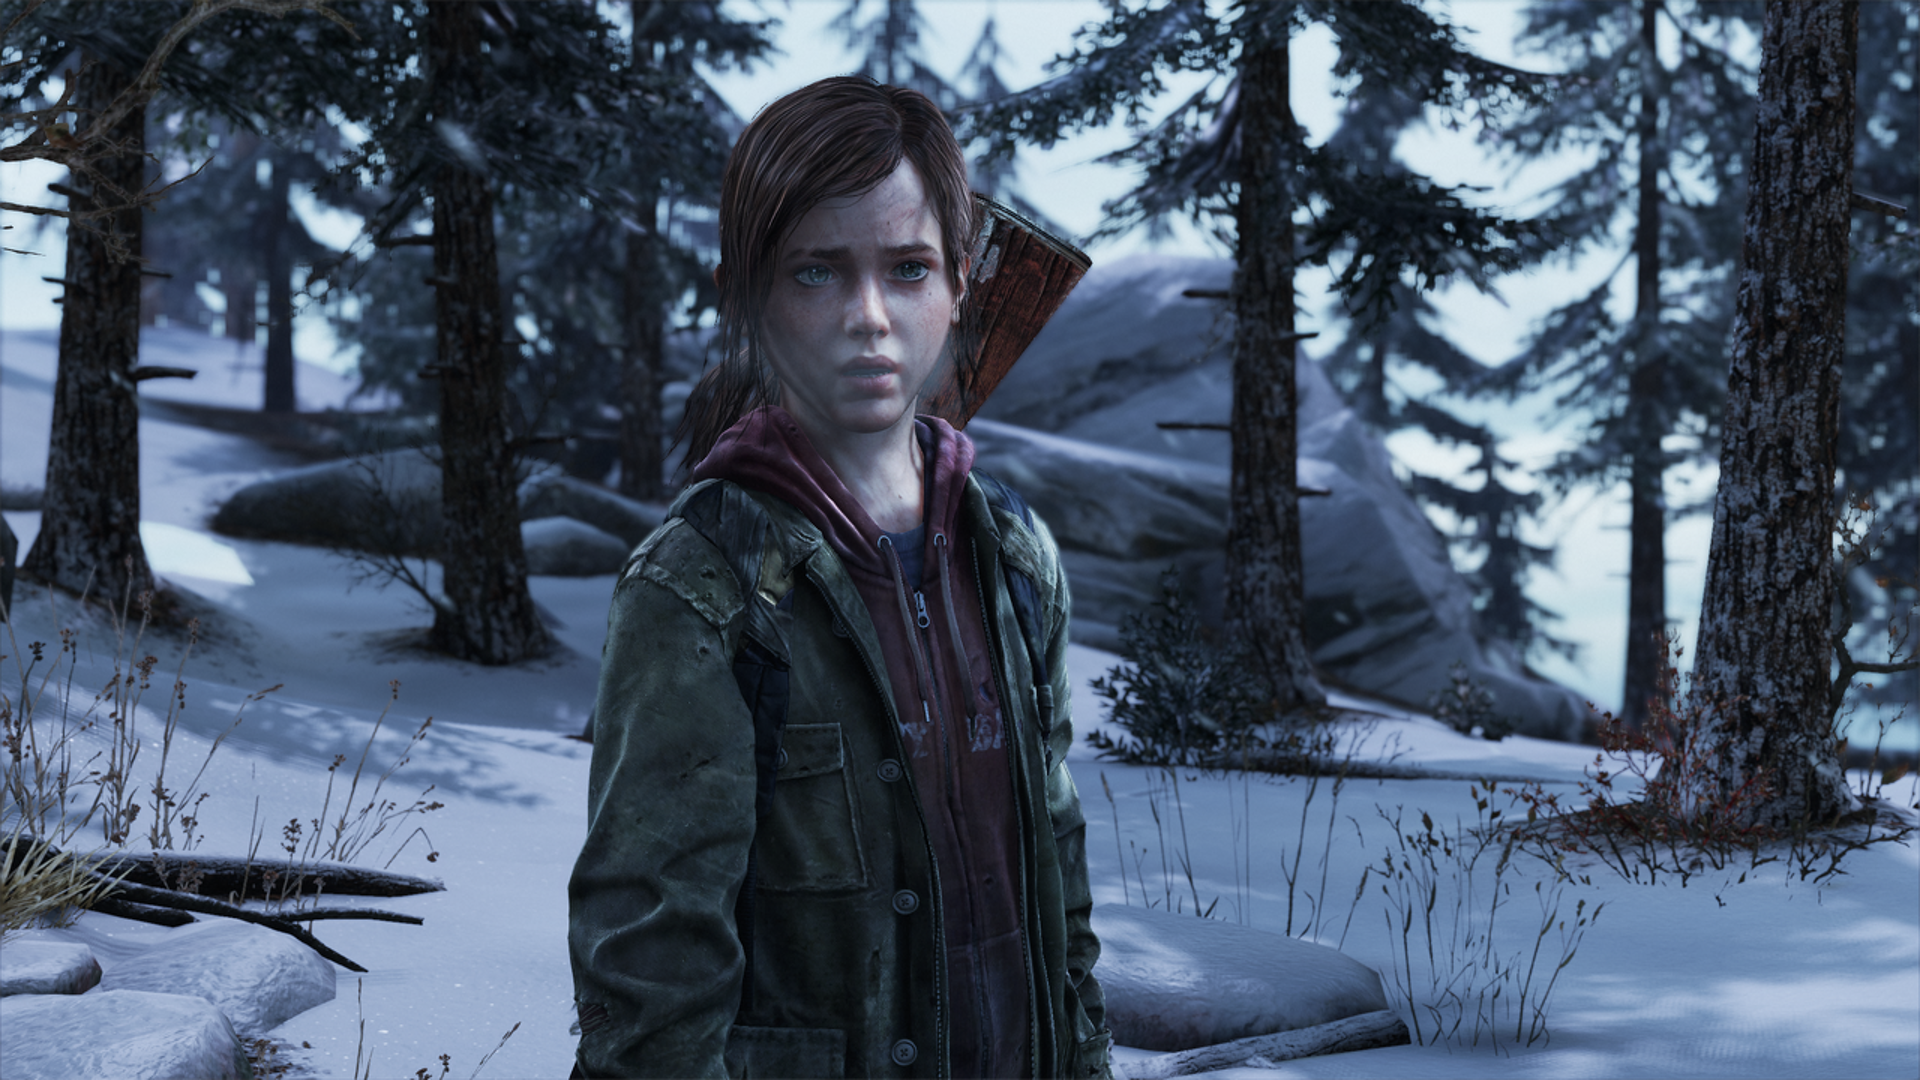 General 1920x1080 video games The Last of Us video game characters video game girls Ellie Williams snow winter cold screen shot